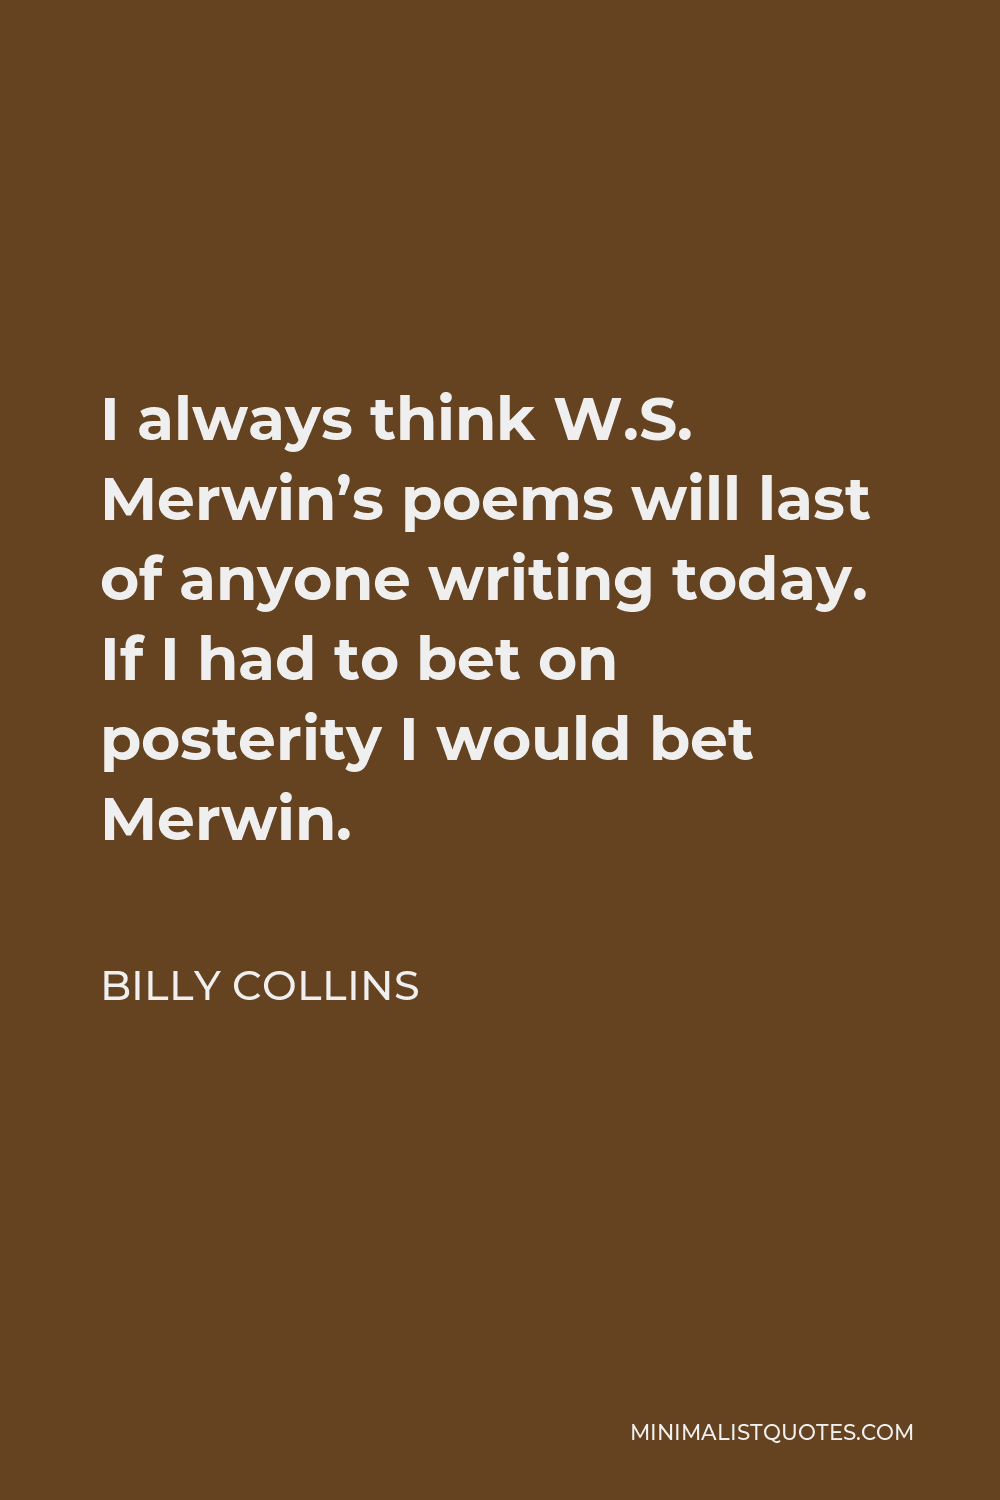 Billy Collins Quote - I always think W.S. Merwin’s poems will last of anyone writing today. If I had to bet on posterity I would bet Merwin.